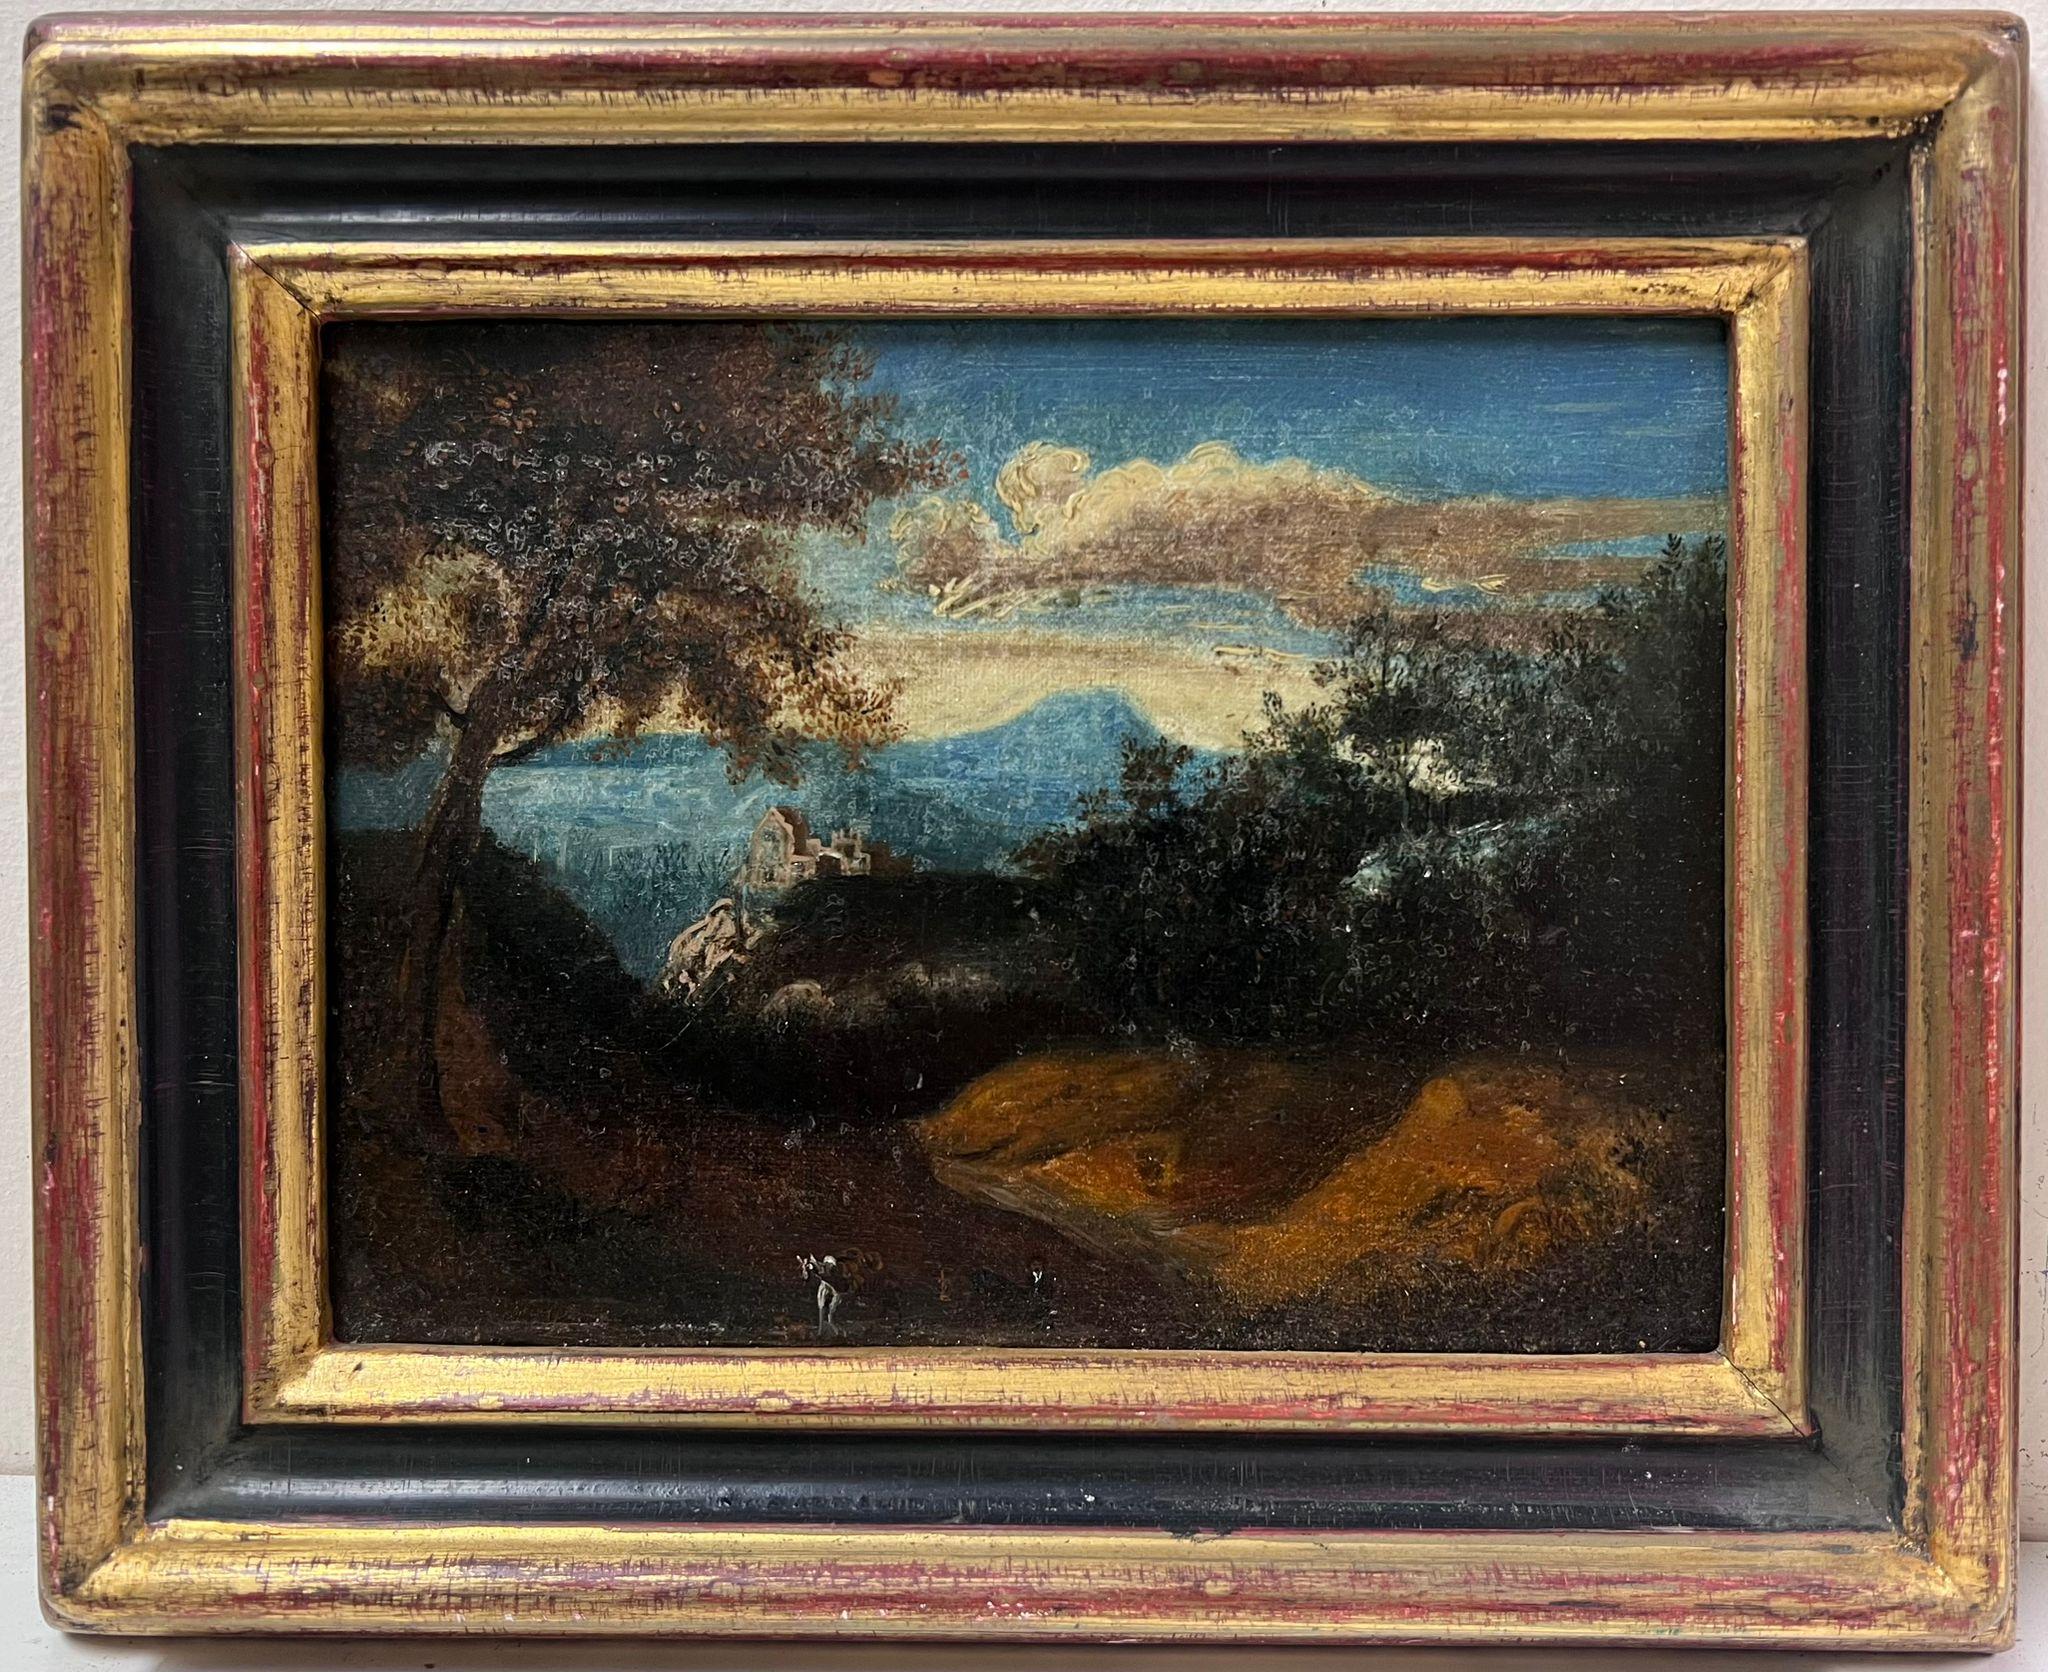 Figure in Arcadian Landscape
French School, 18th century
oil on canvas, framed
framed: 10 x 12 inches
canvas : 6.5 x 9 inches
provenance: private collection
condition: very good and sound condition 